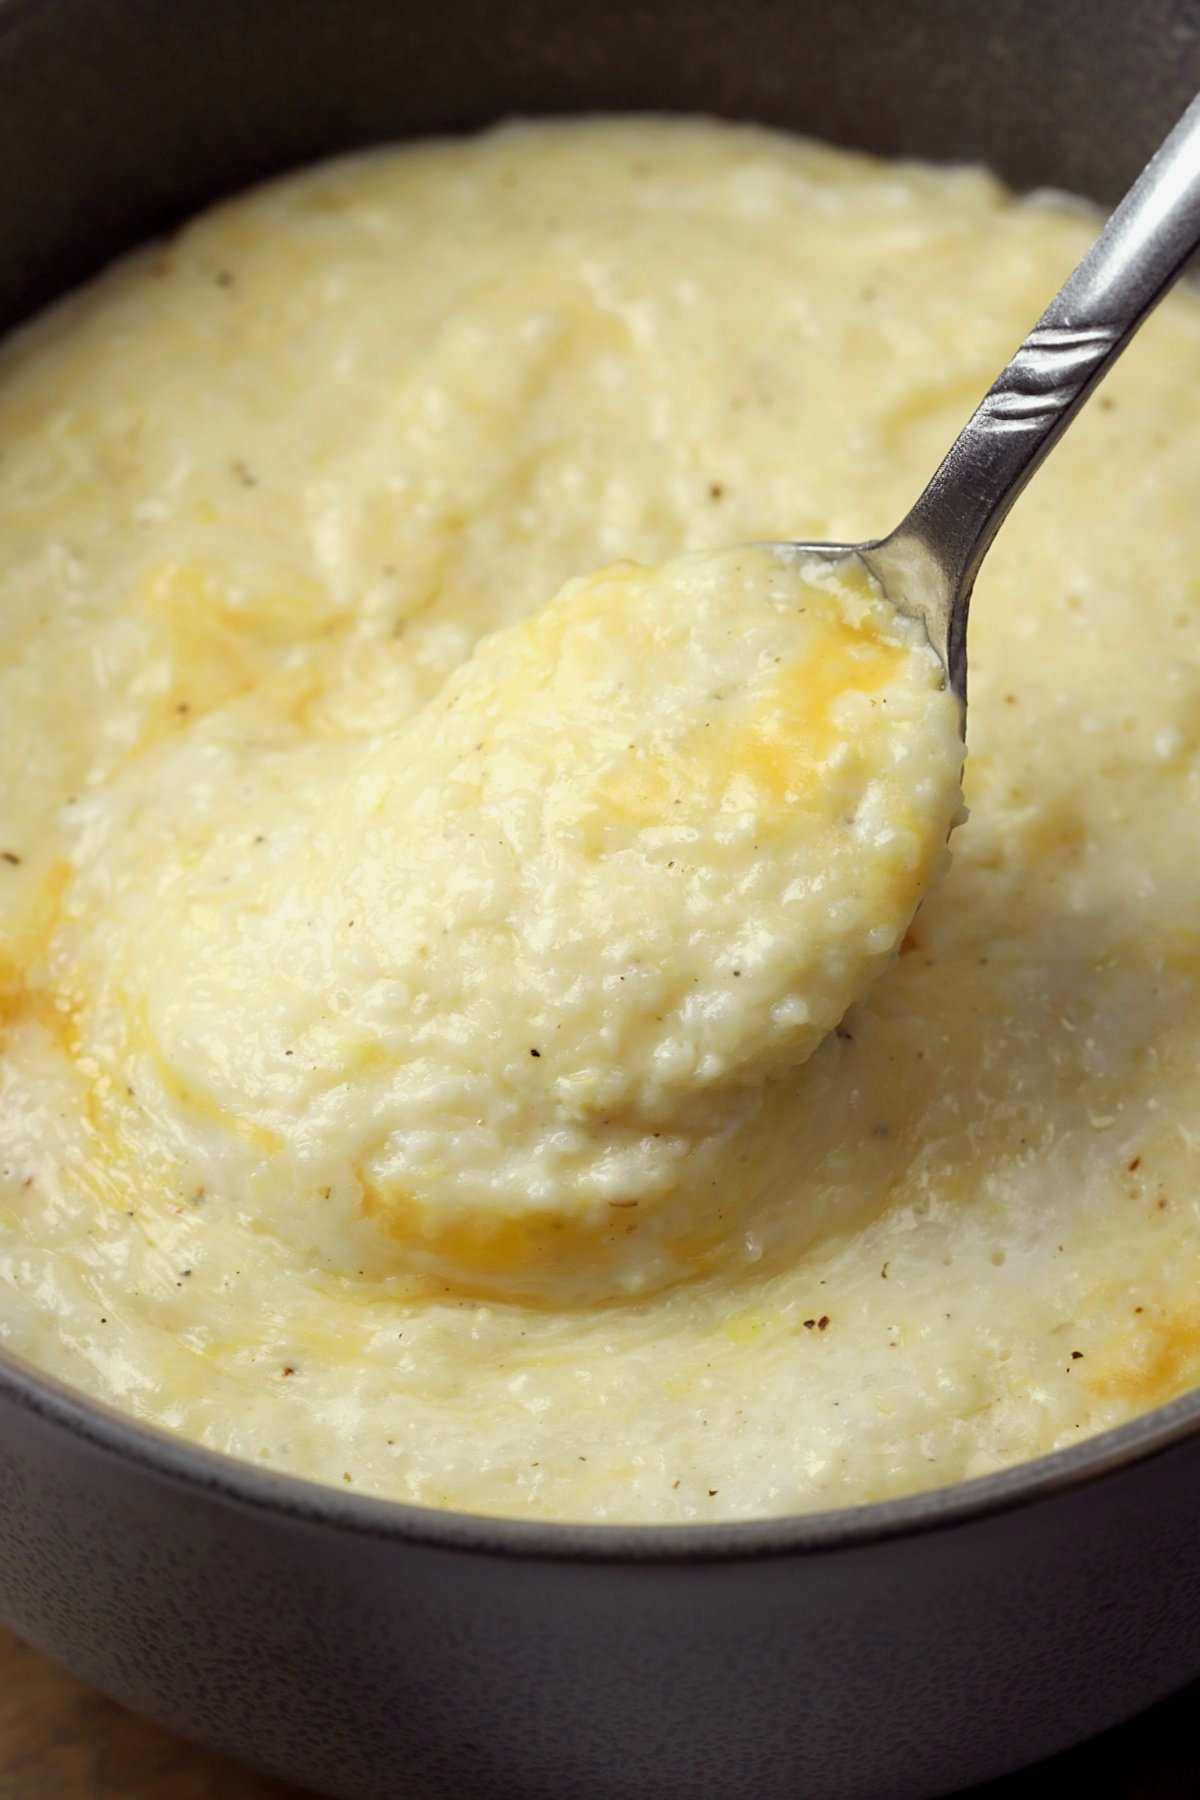 Cheesy Grits by The Toasty Kitchen